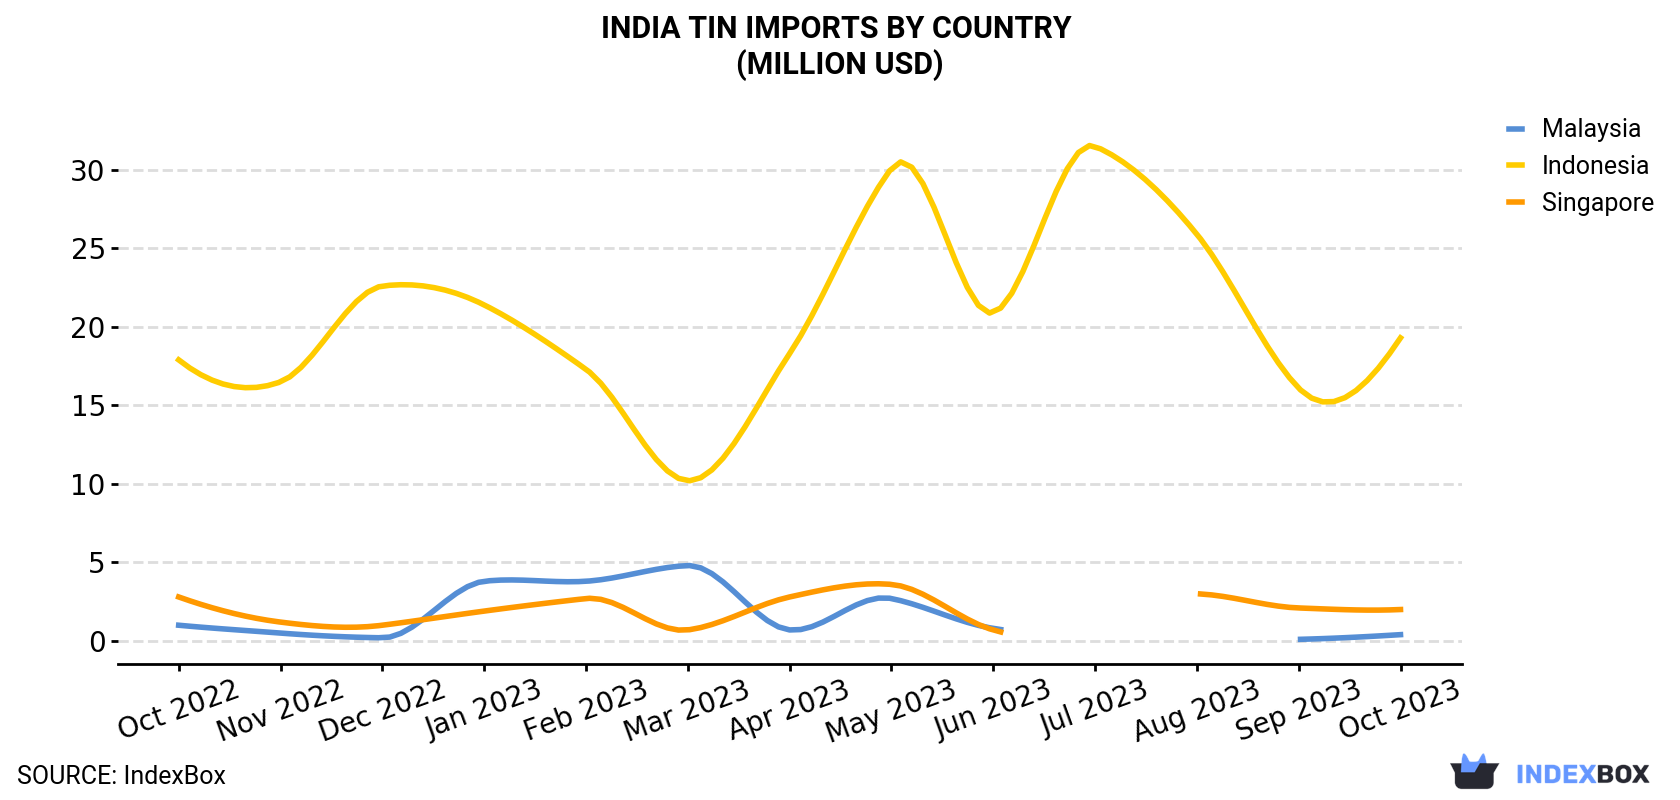 India Tin Imports By Country (Million USD)